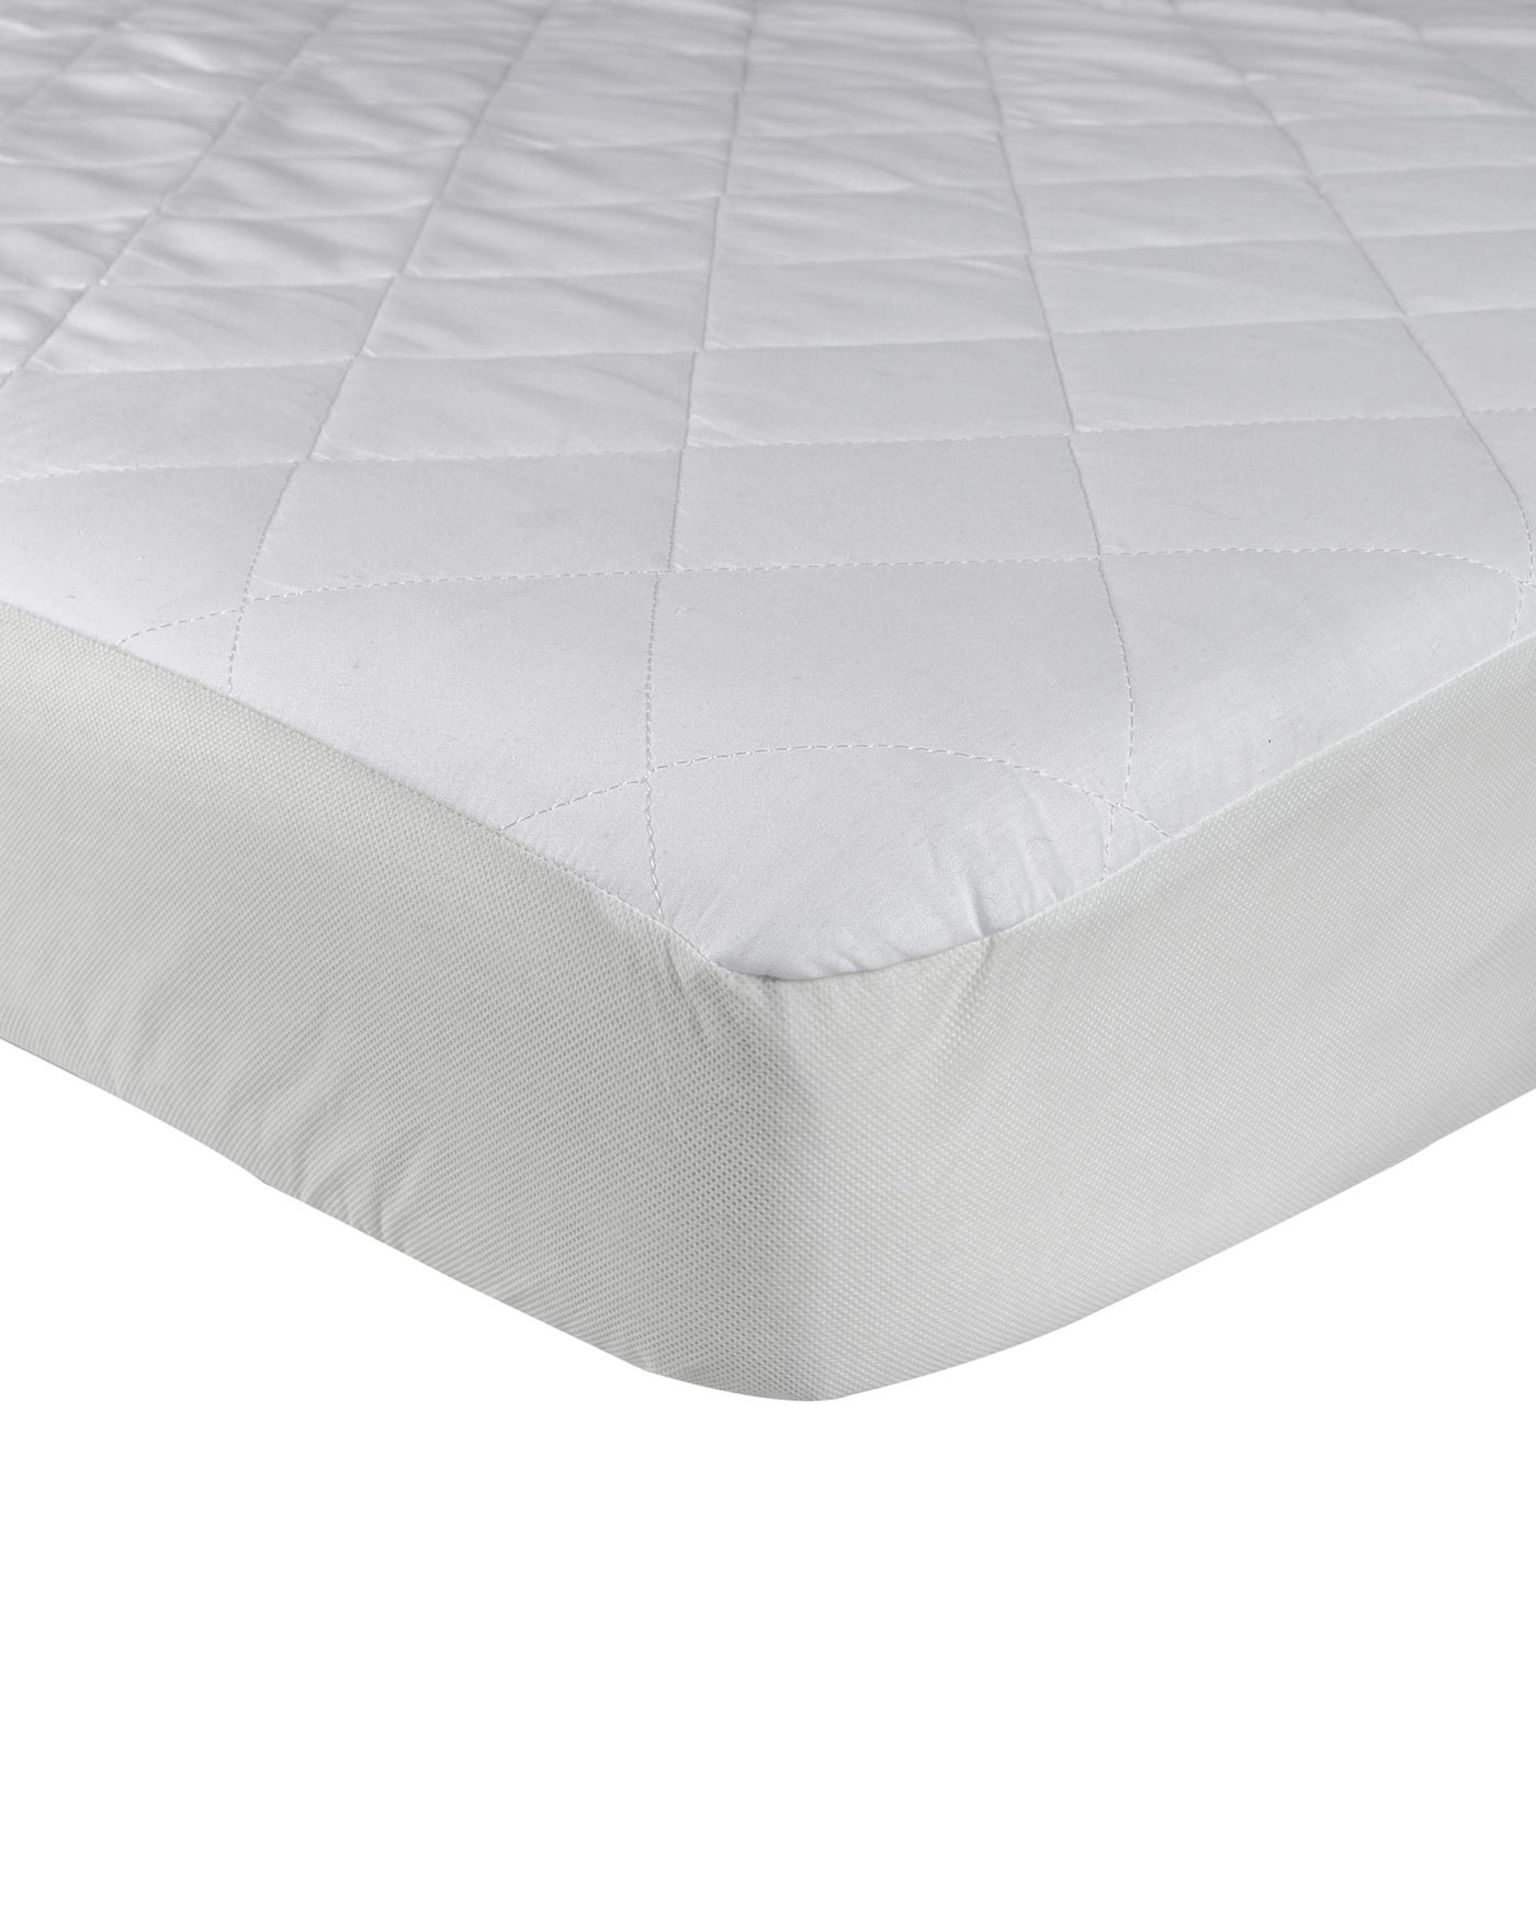 + VAT Brand New Extra Deep Luxury Quilted Fitted Double Bed Mattress Protector 33cm